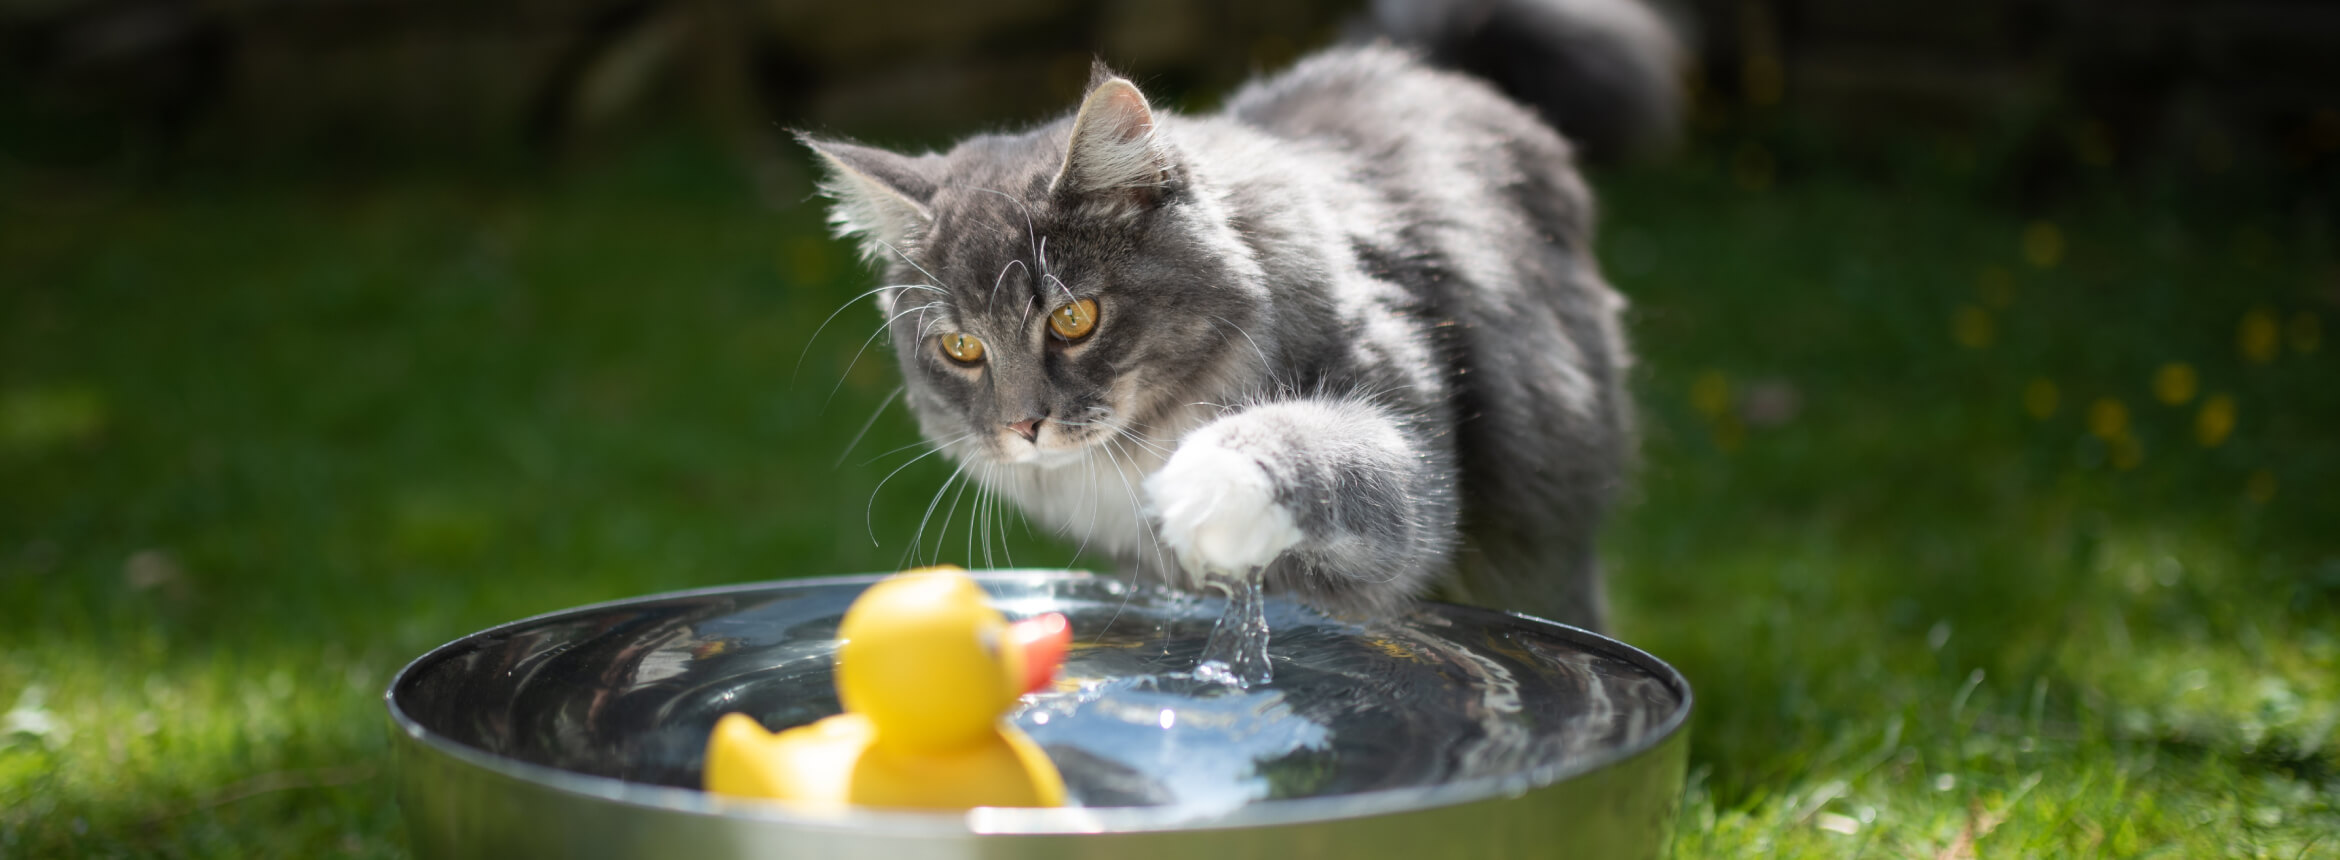 image of a cat playing with water bowl